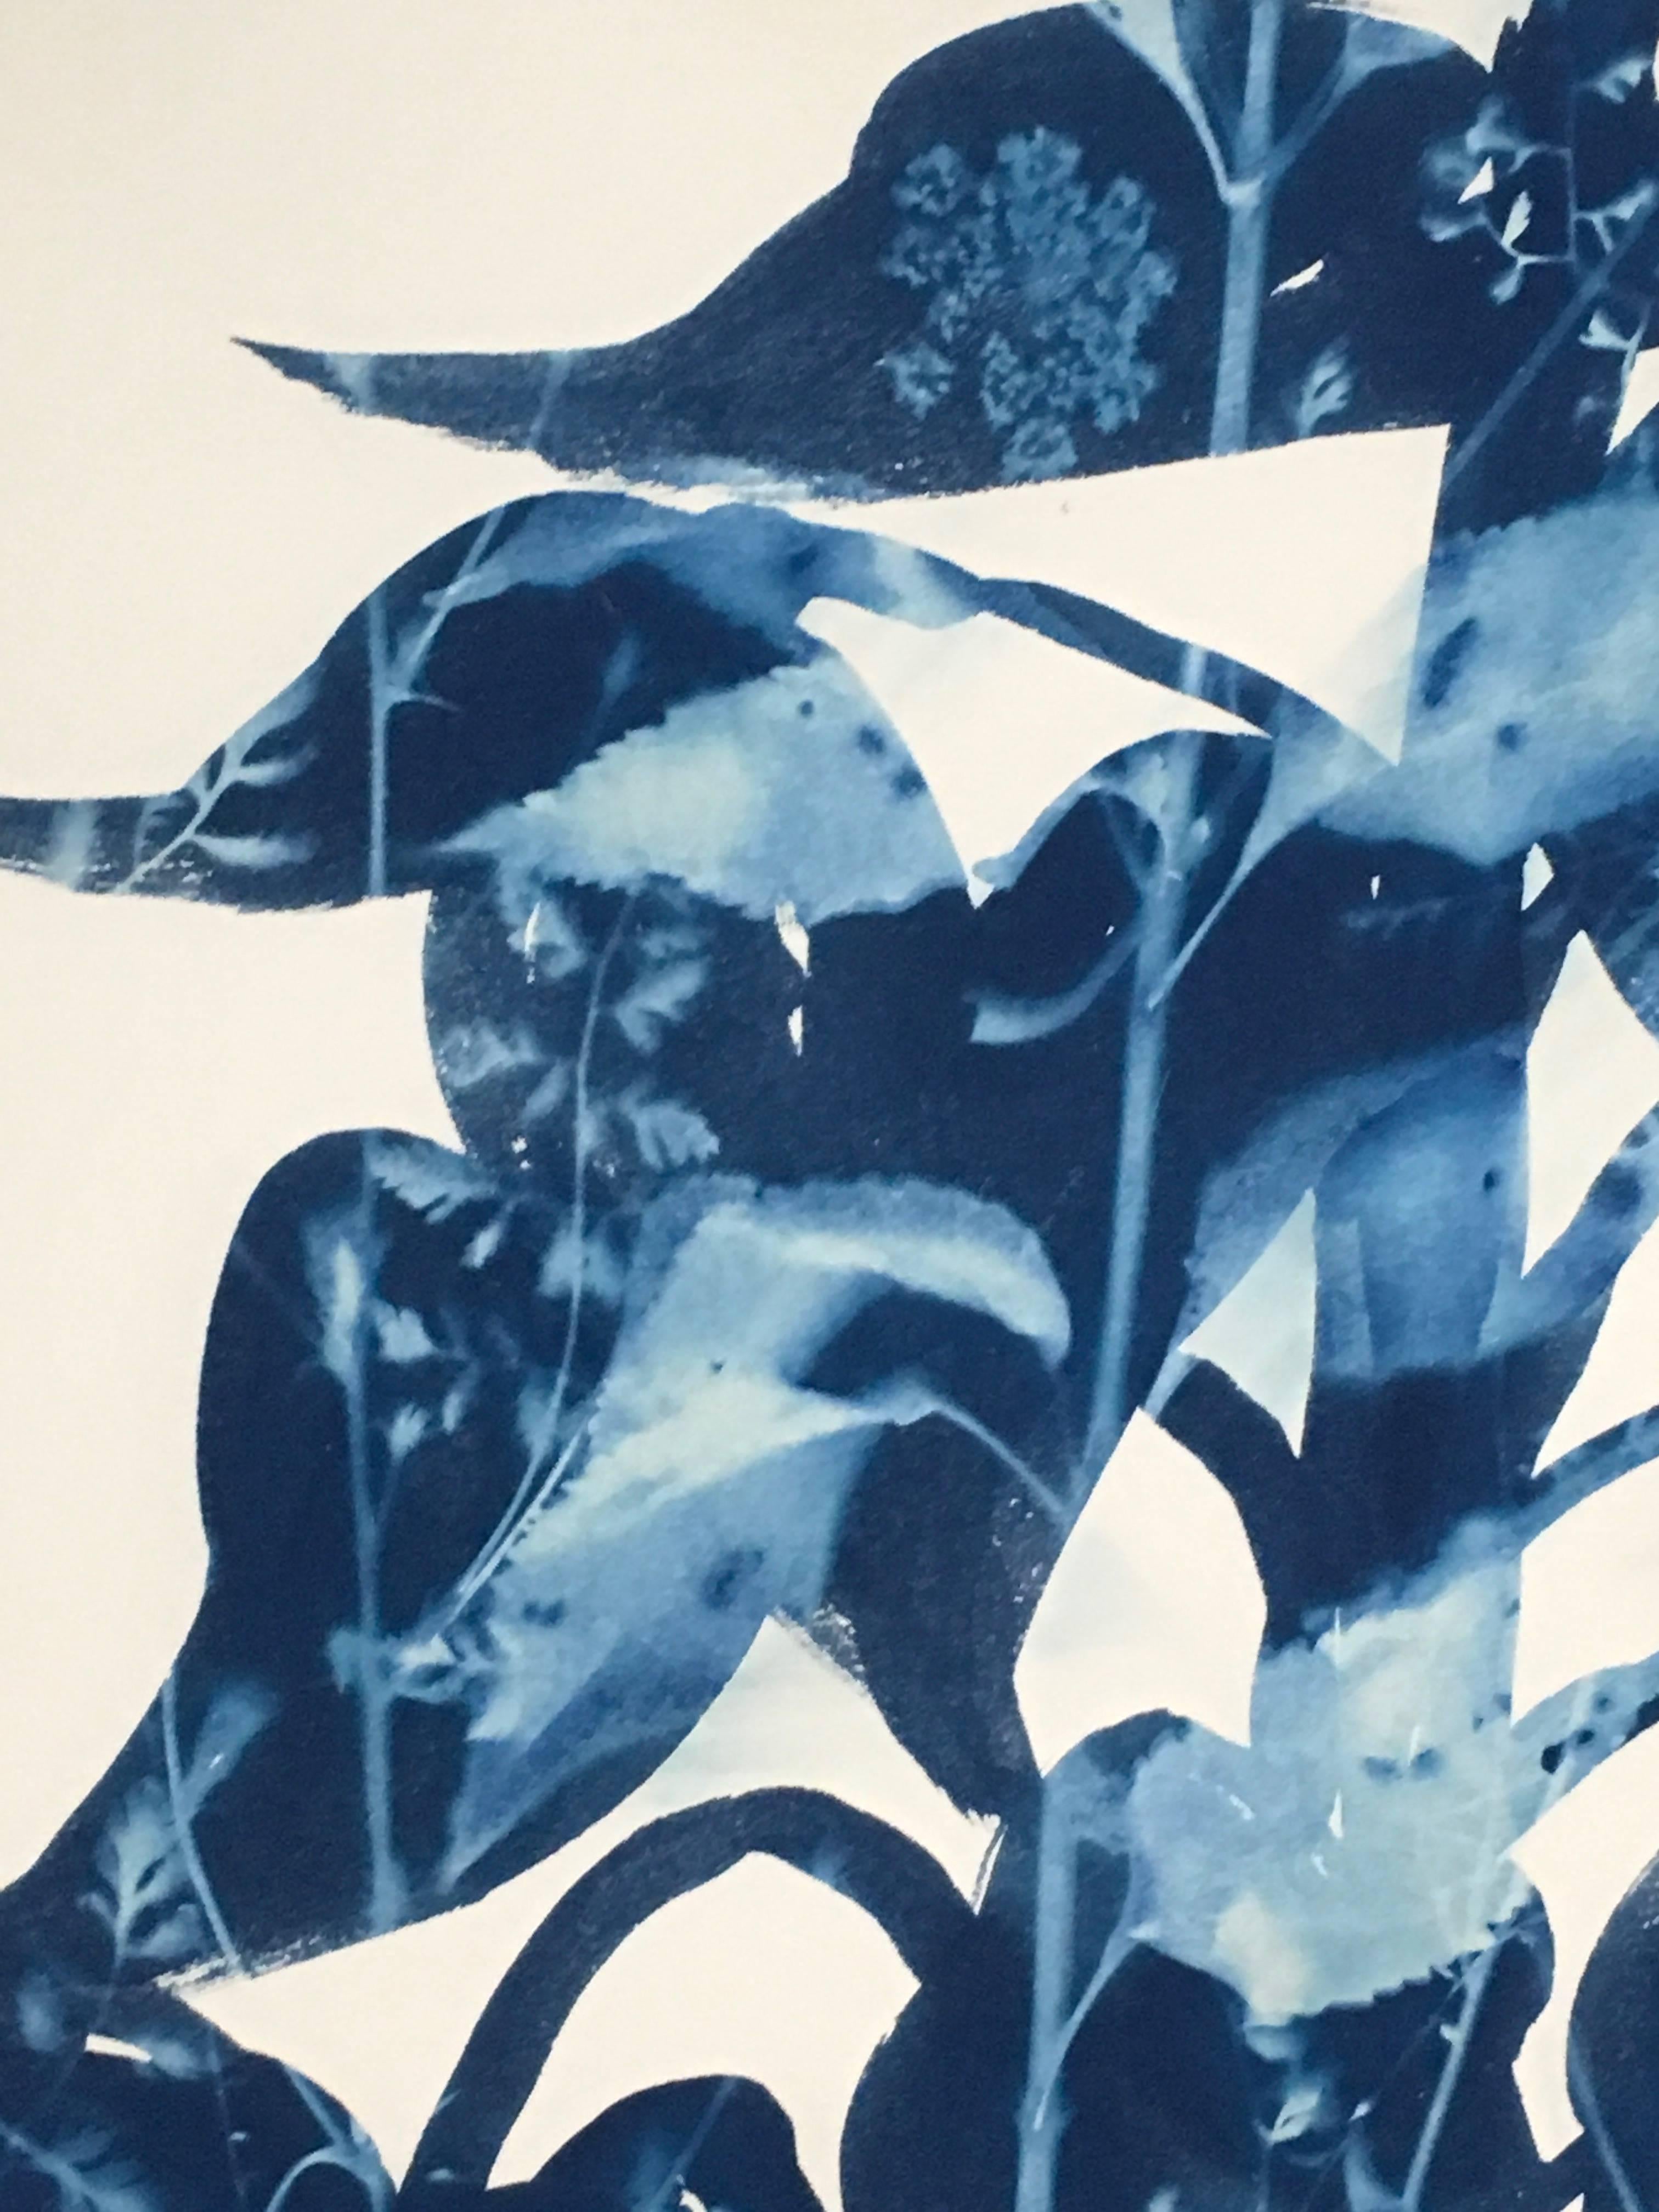 American Giant is a Cyanotype by Cynthia MacCollum.  It is 40.5x29.5 on archival paper. It is currently unframed.

According to MacCollum, 